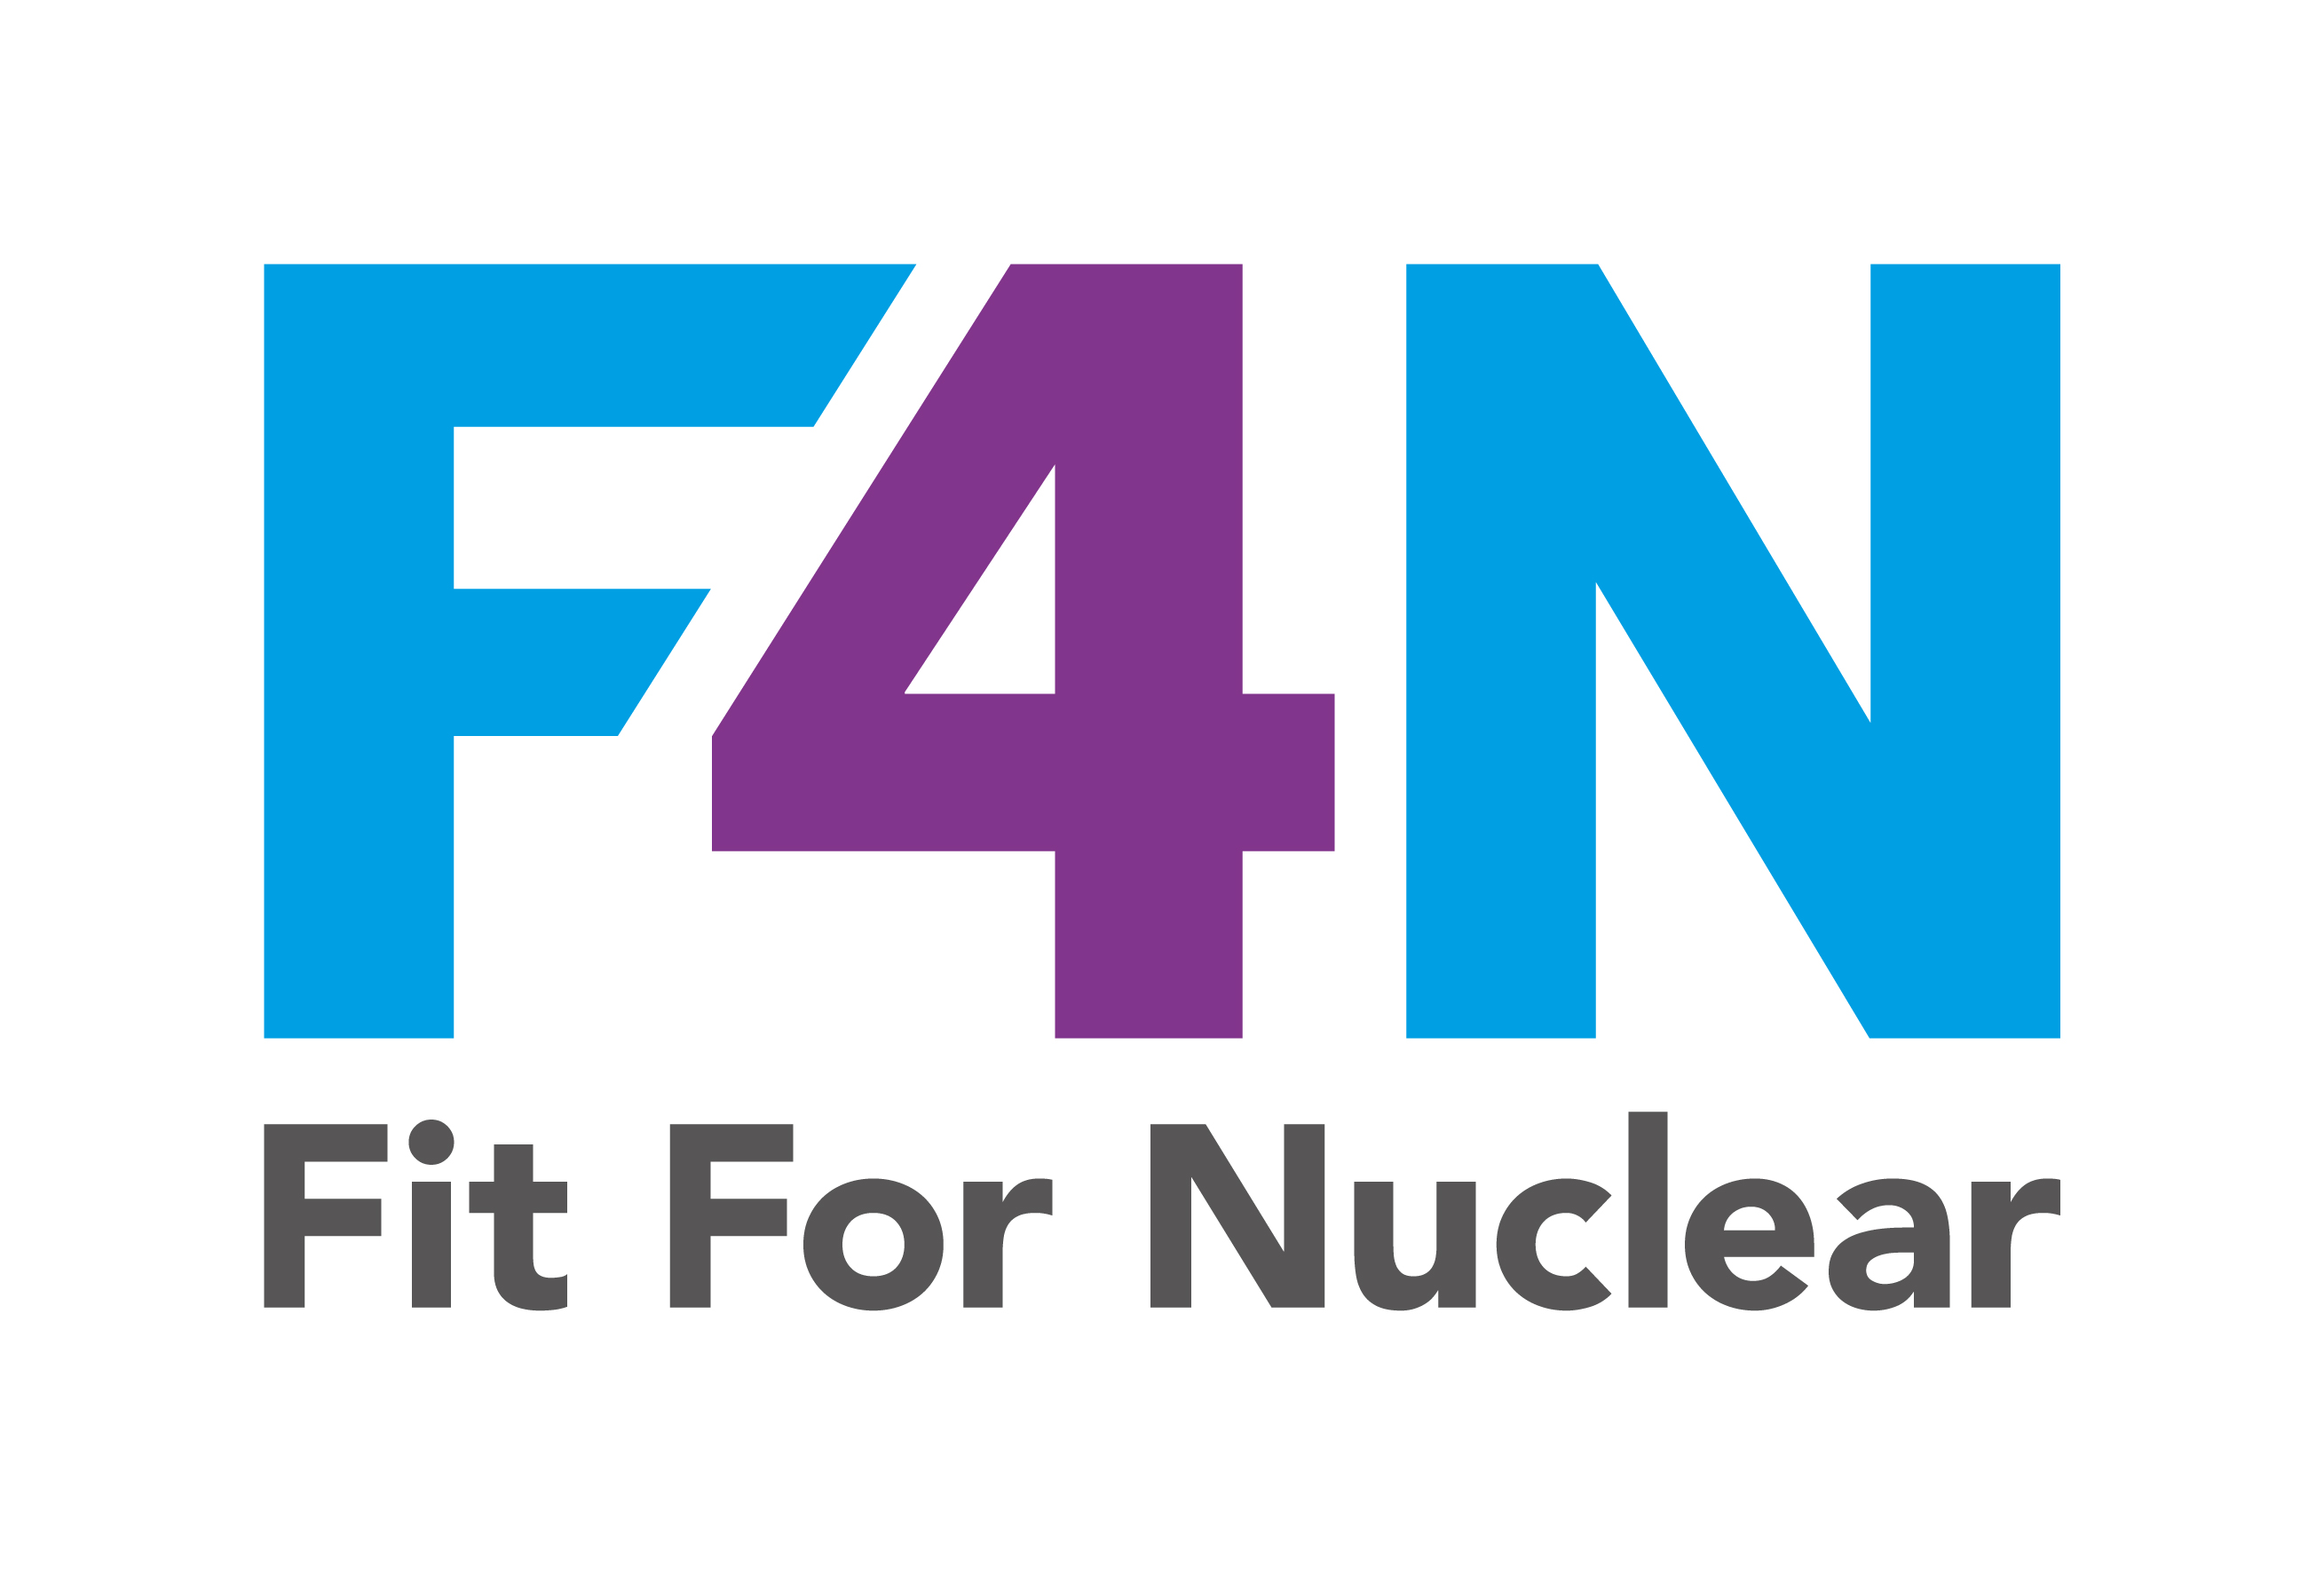 The F4N status has been granted to ECS Engineering Services by the Nuclear Advanced Manufacturing Research Centre (AMRC), recognising ECS’s journey of business improvement and capability to supply to the nuclear sector.